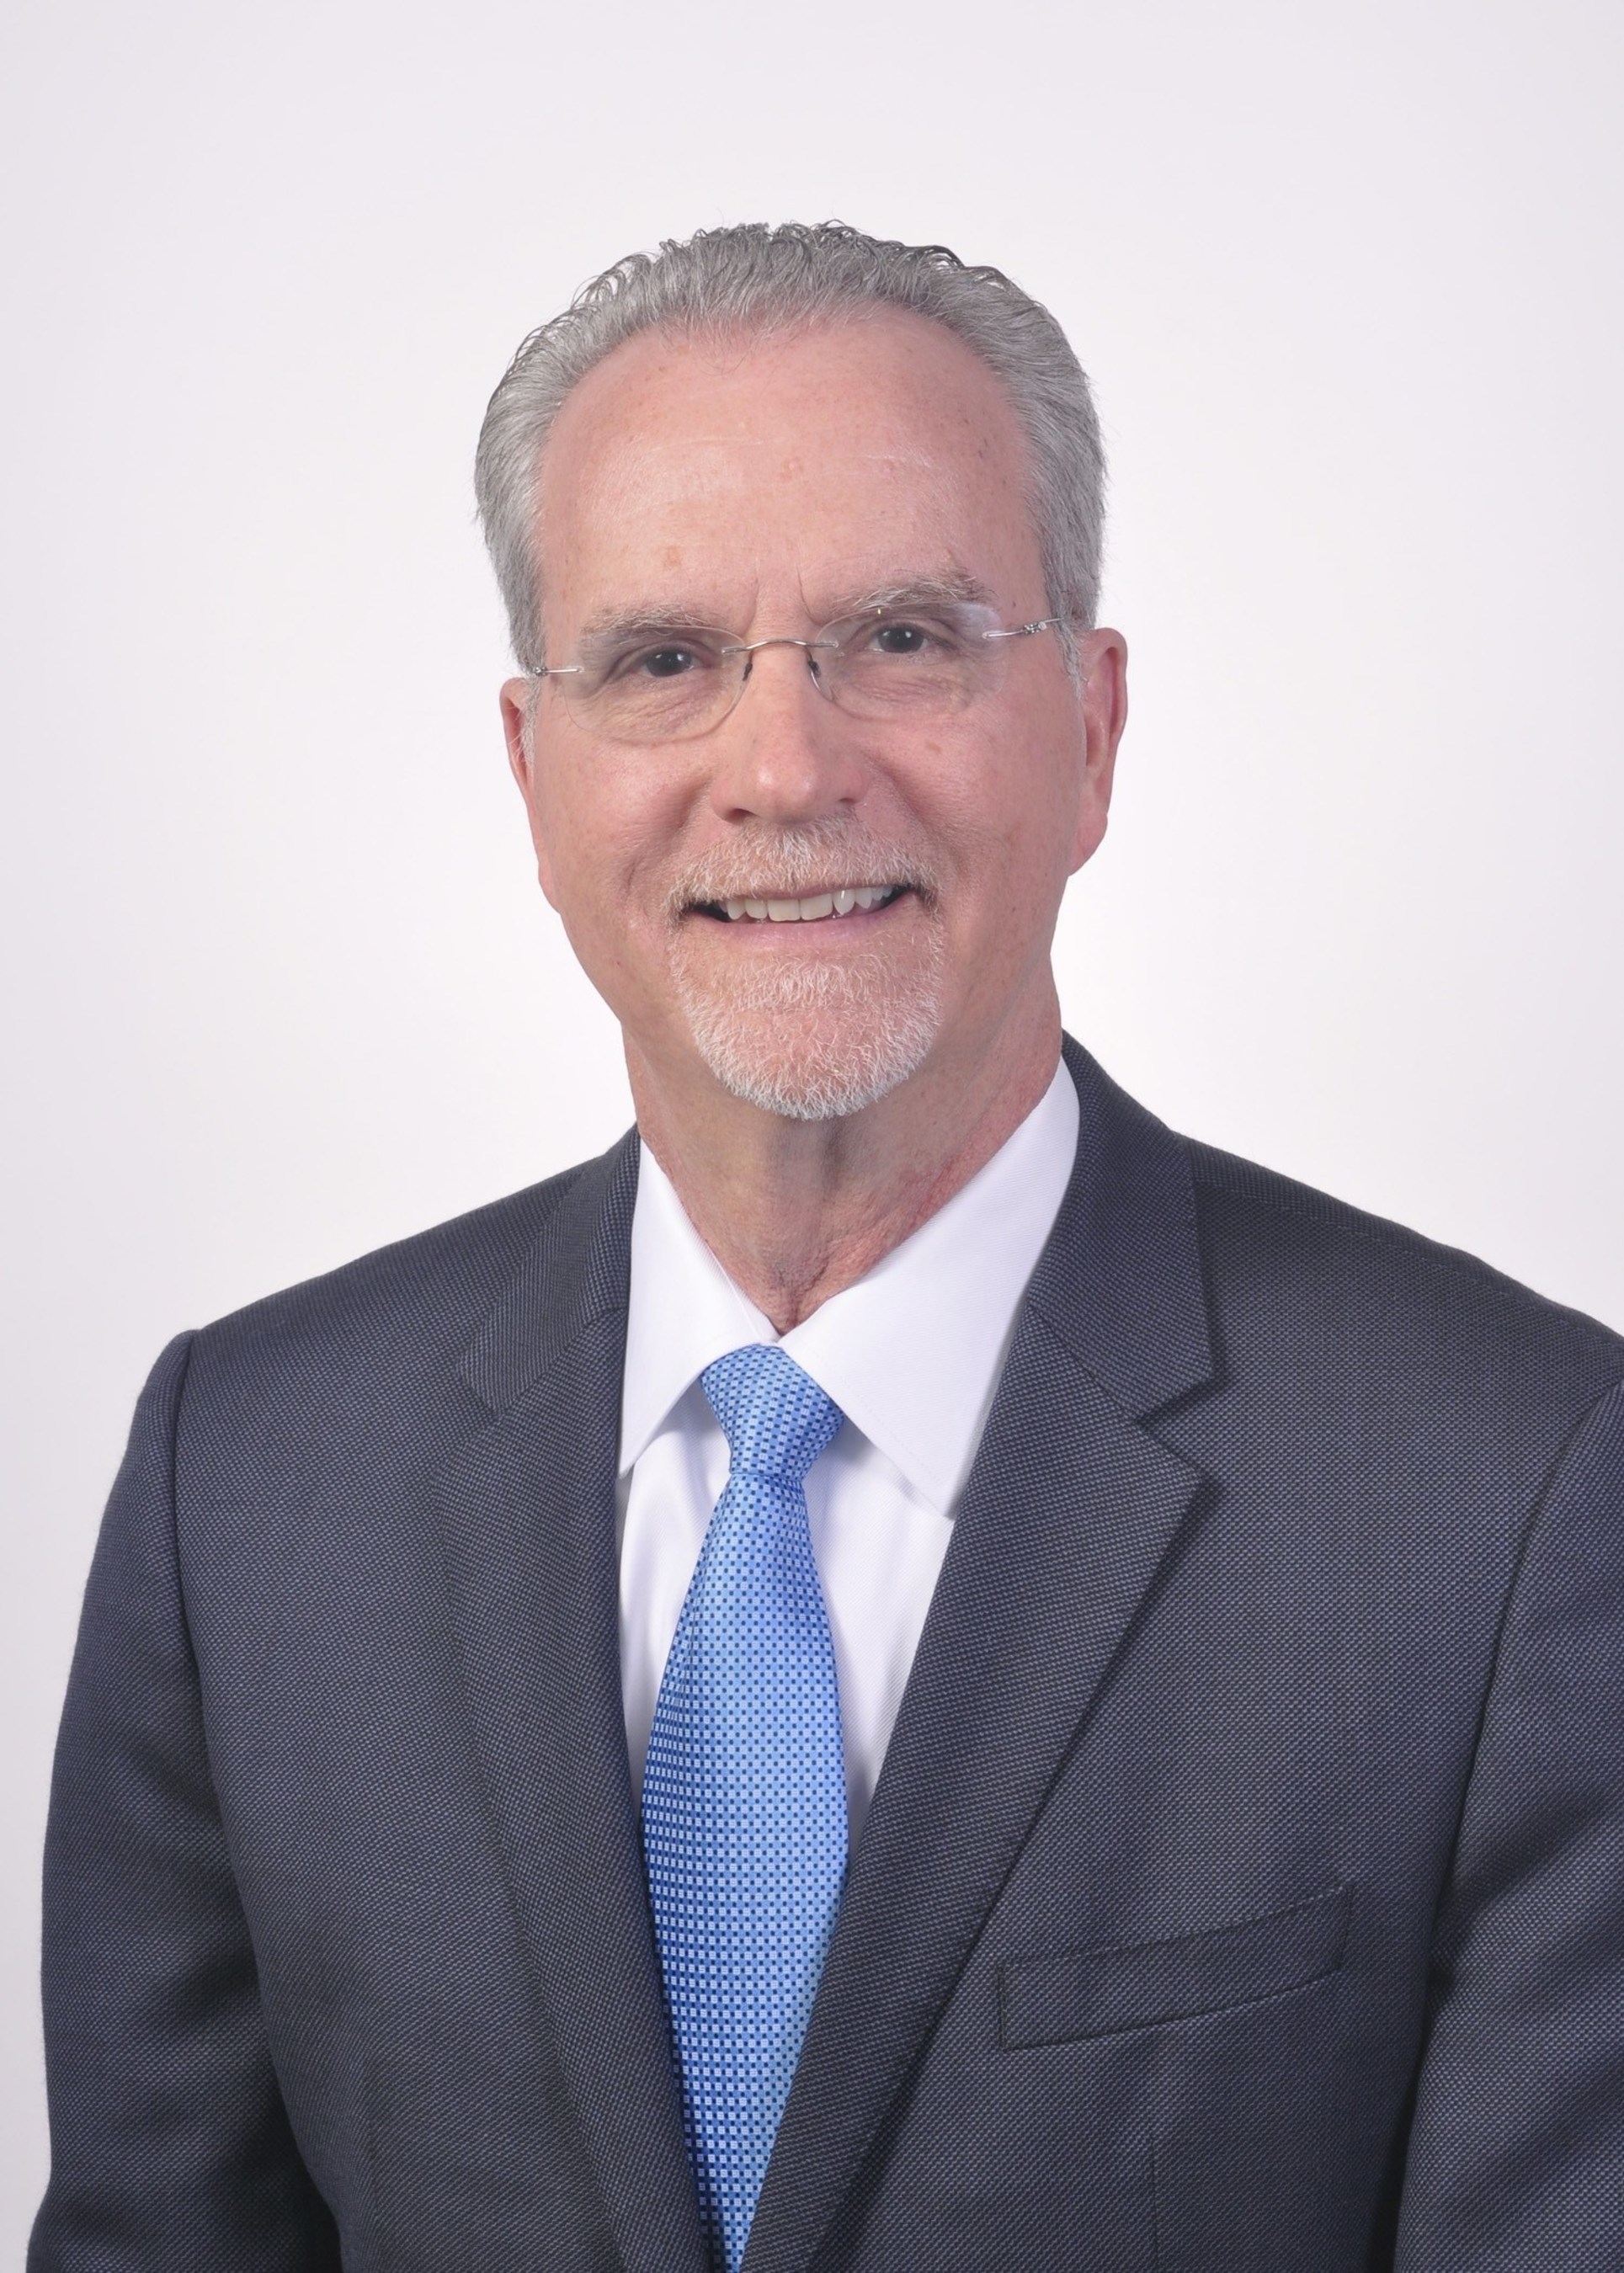 David H. Ledbetter, Ph.D., Geisinger executive vice president and chief scientific officer